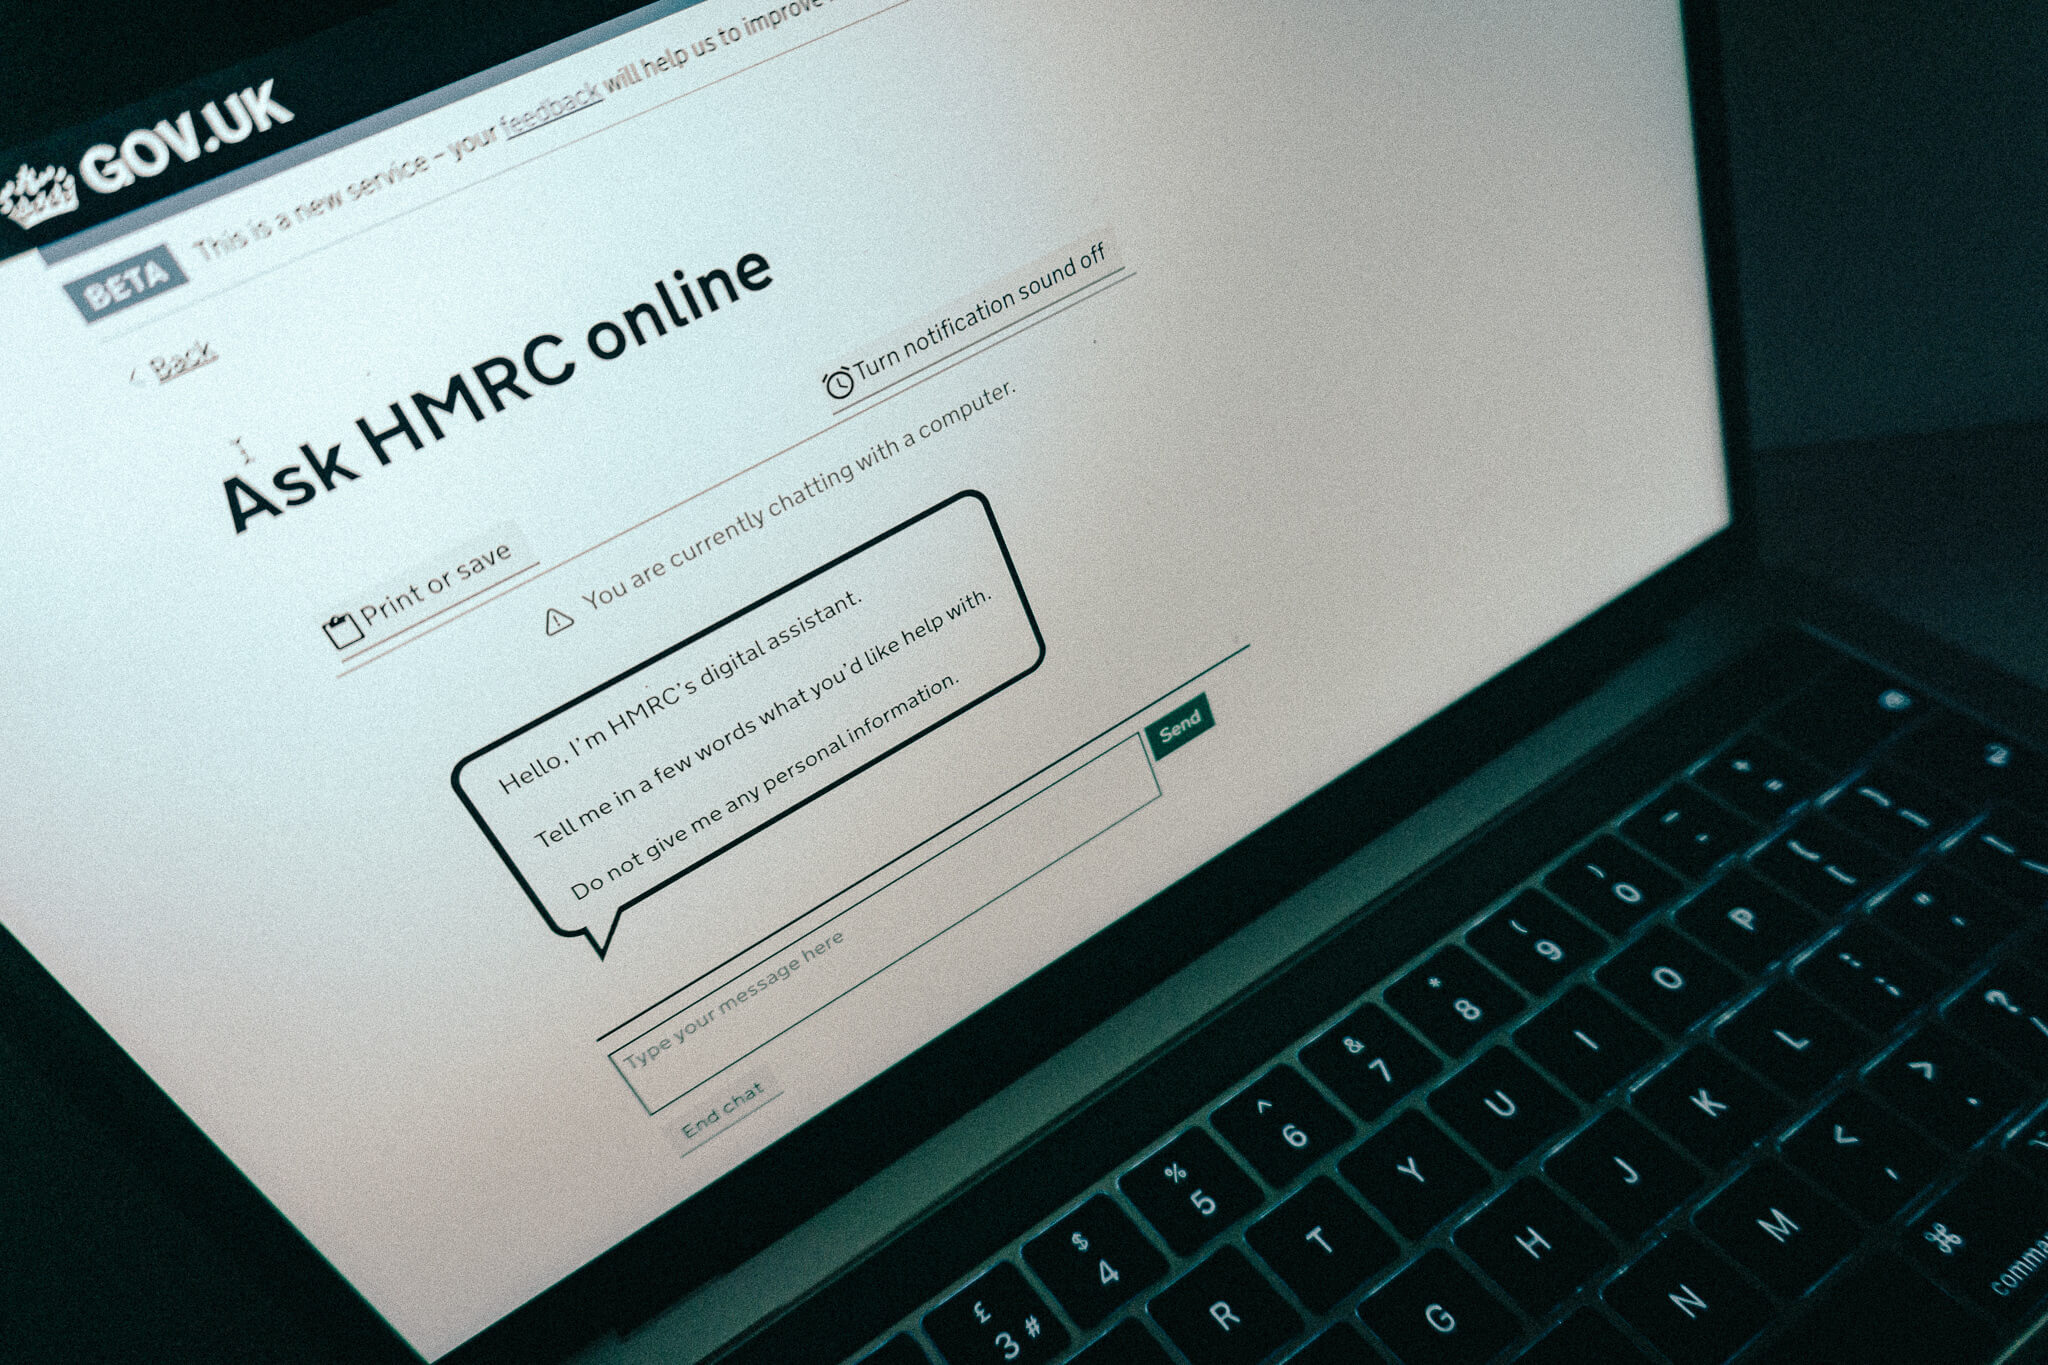 ‘We do not want it to be a hardship to contact us’ – how HMRC hopes to use AI and analytics to transform customer service